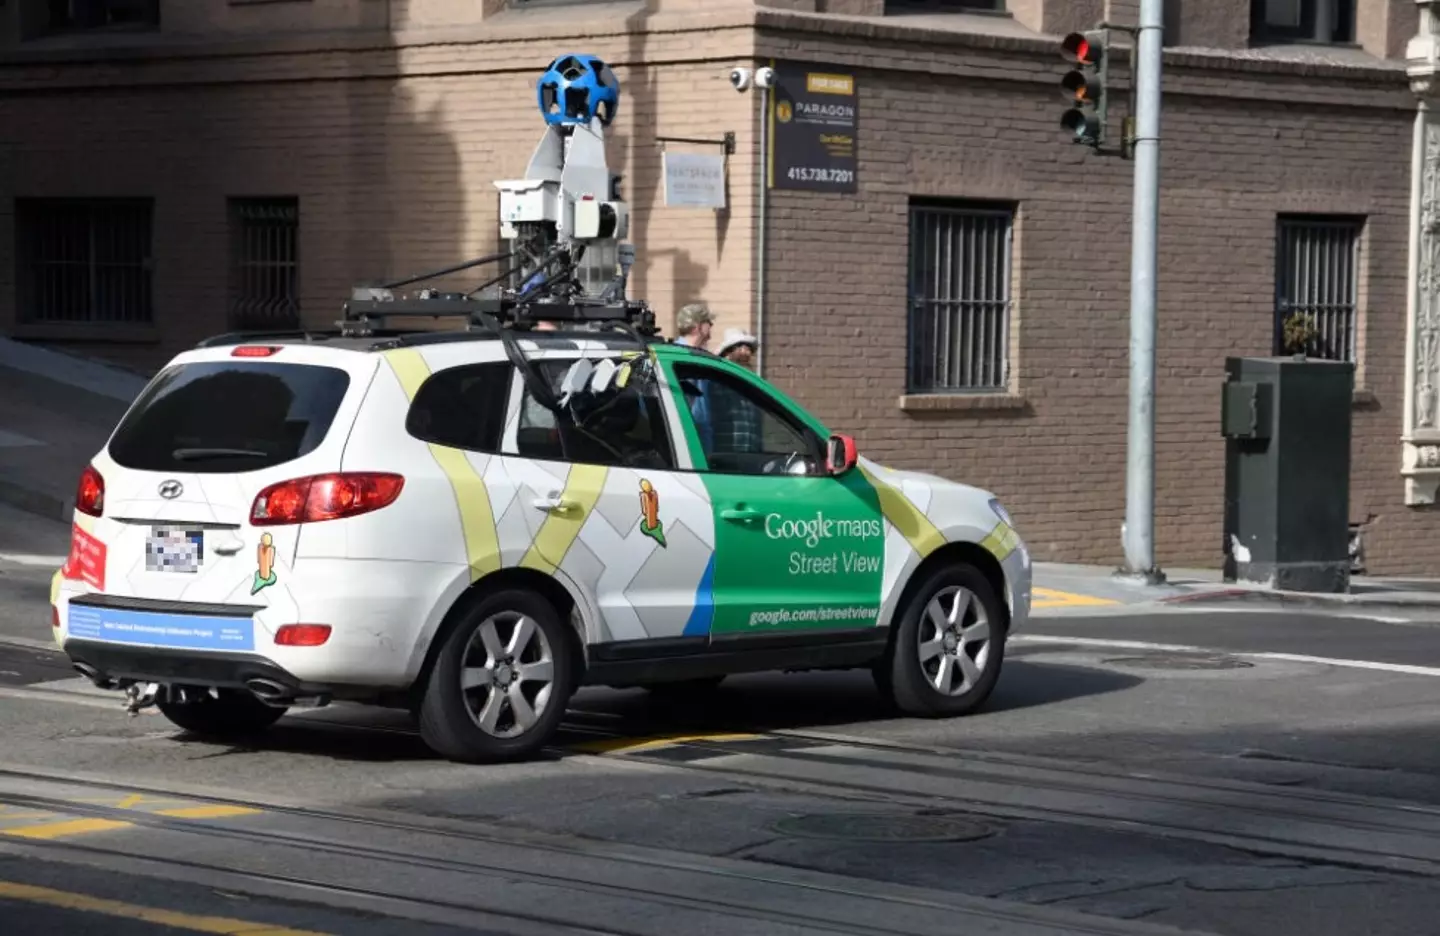 Have you ever spotted the Google Maps car?